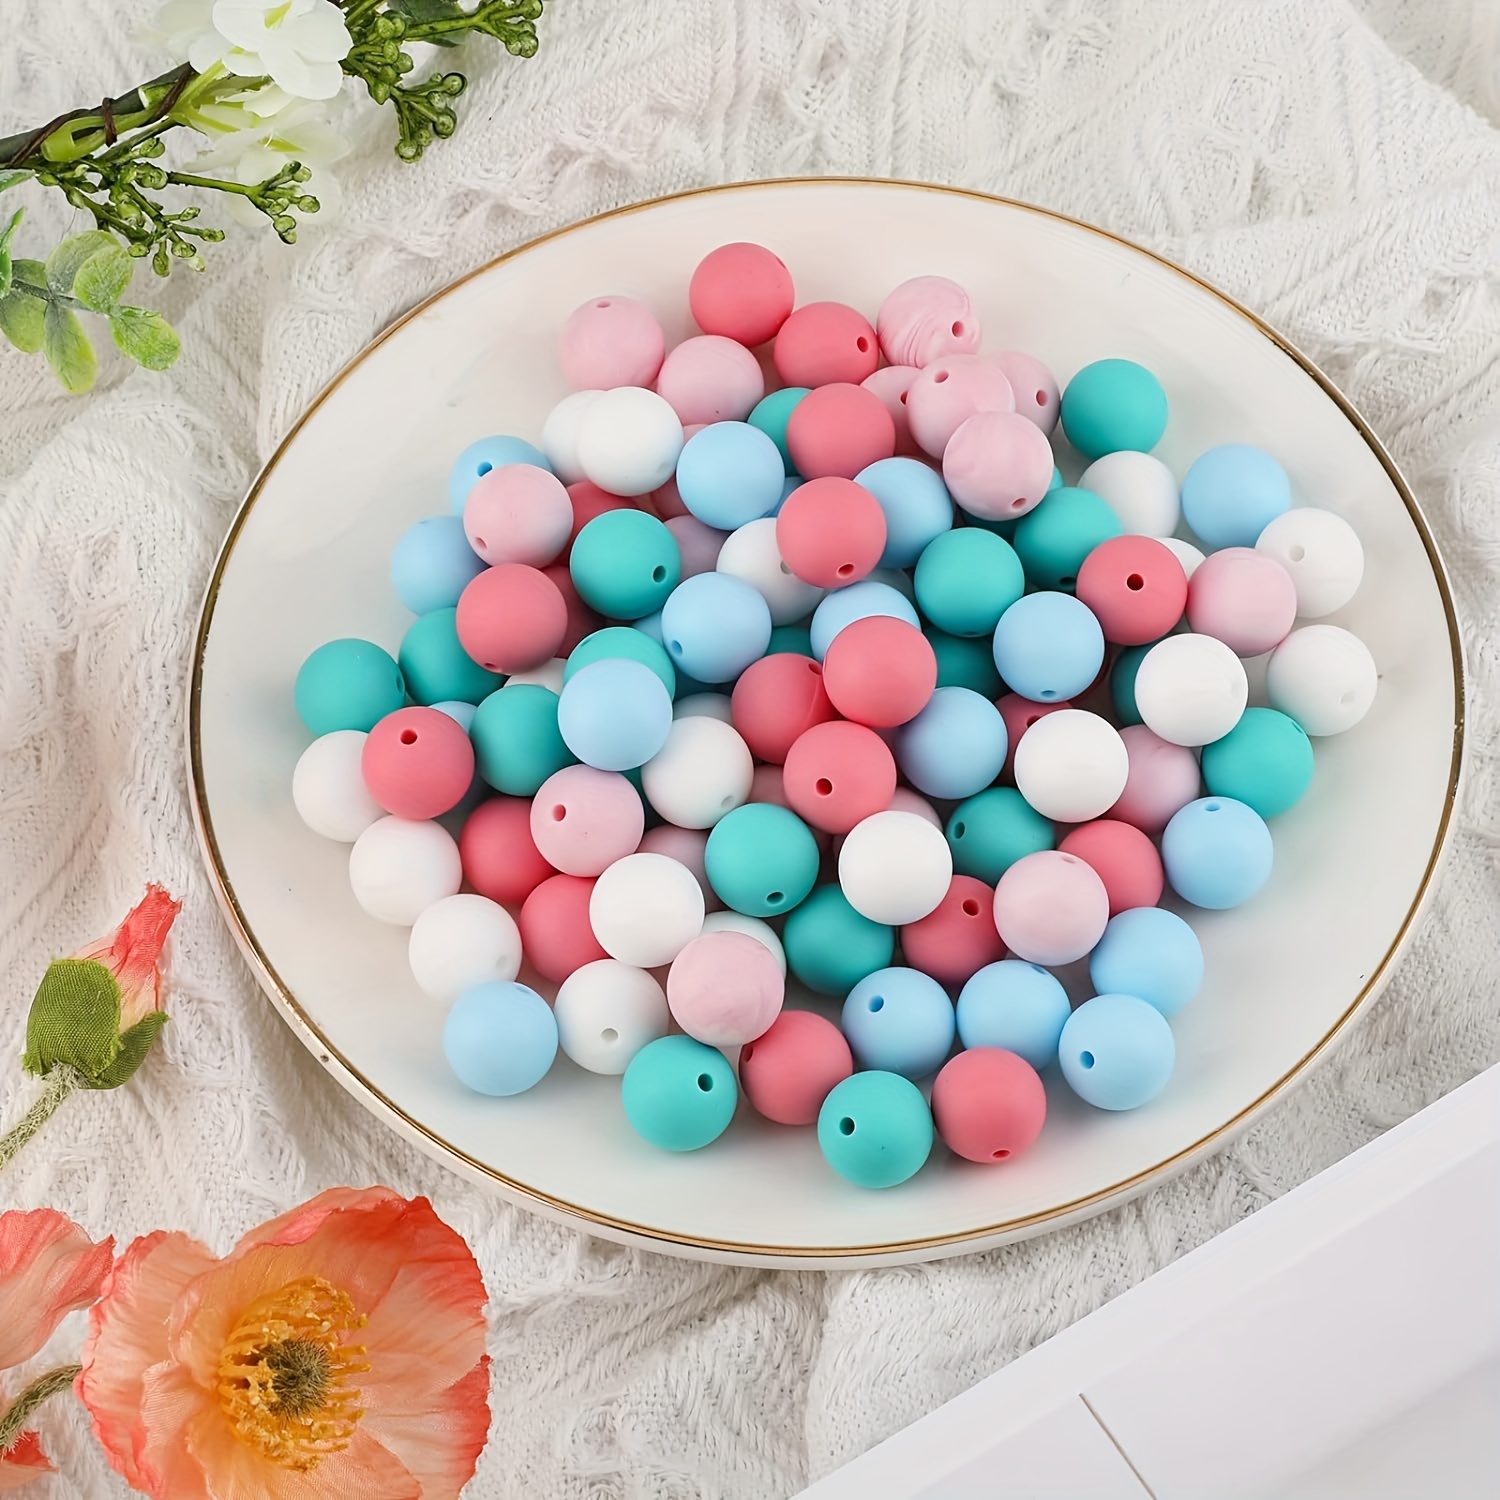 Round Silicone Bulk Mix Color Beads For Jewelry Making Diy